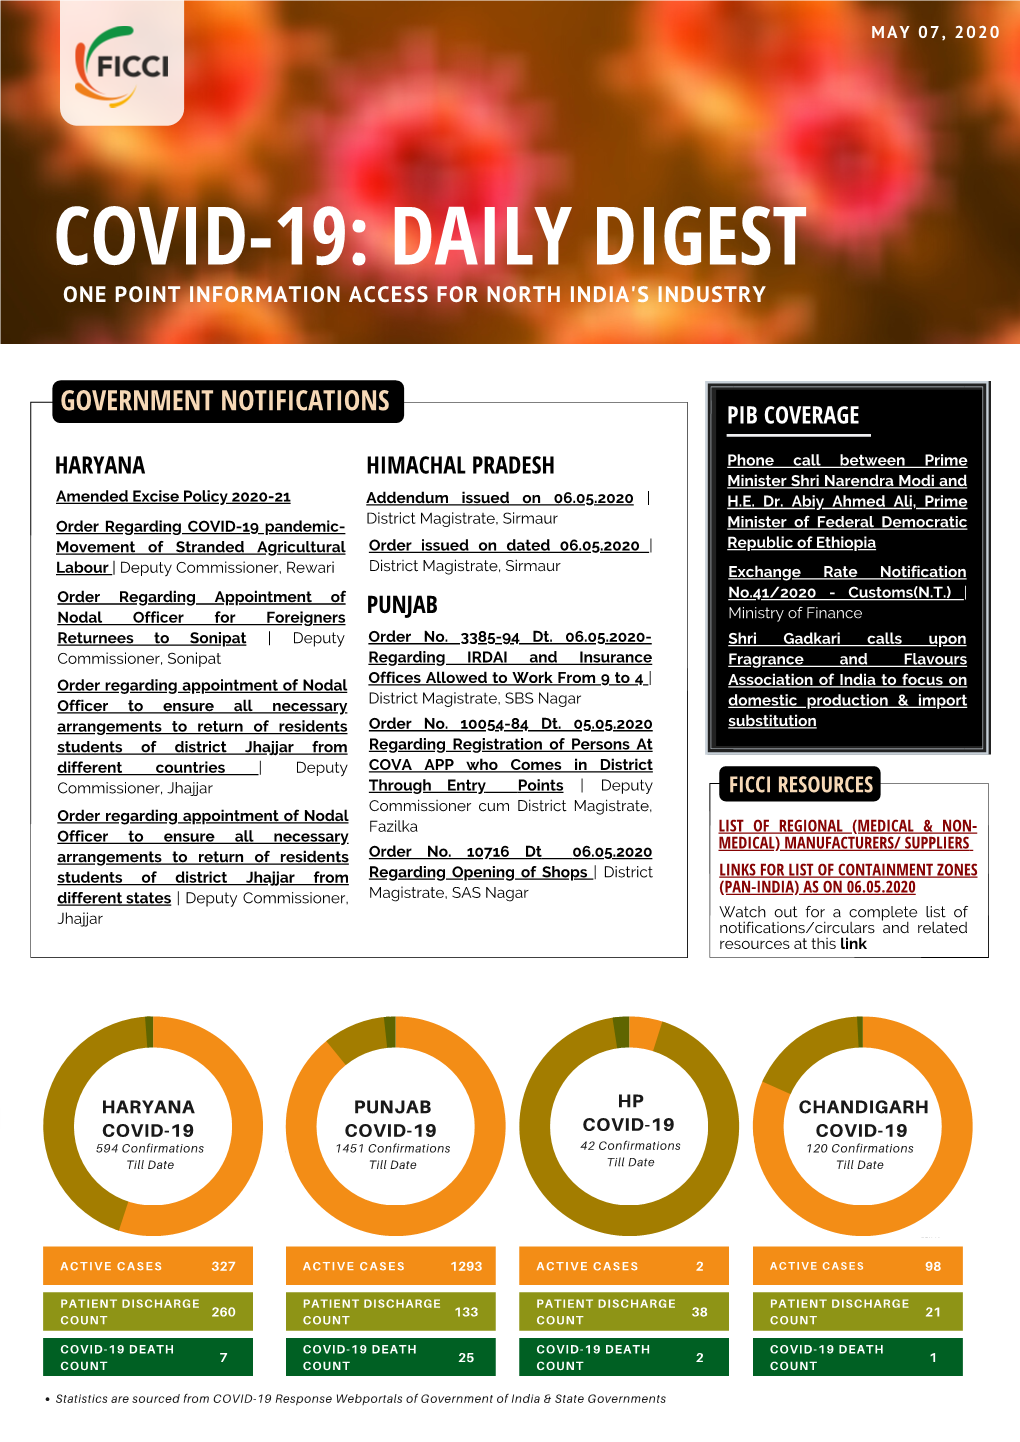 COVID-19 Daily Digest